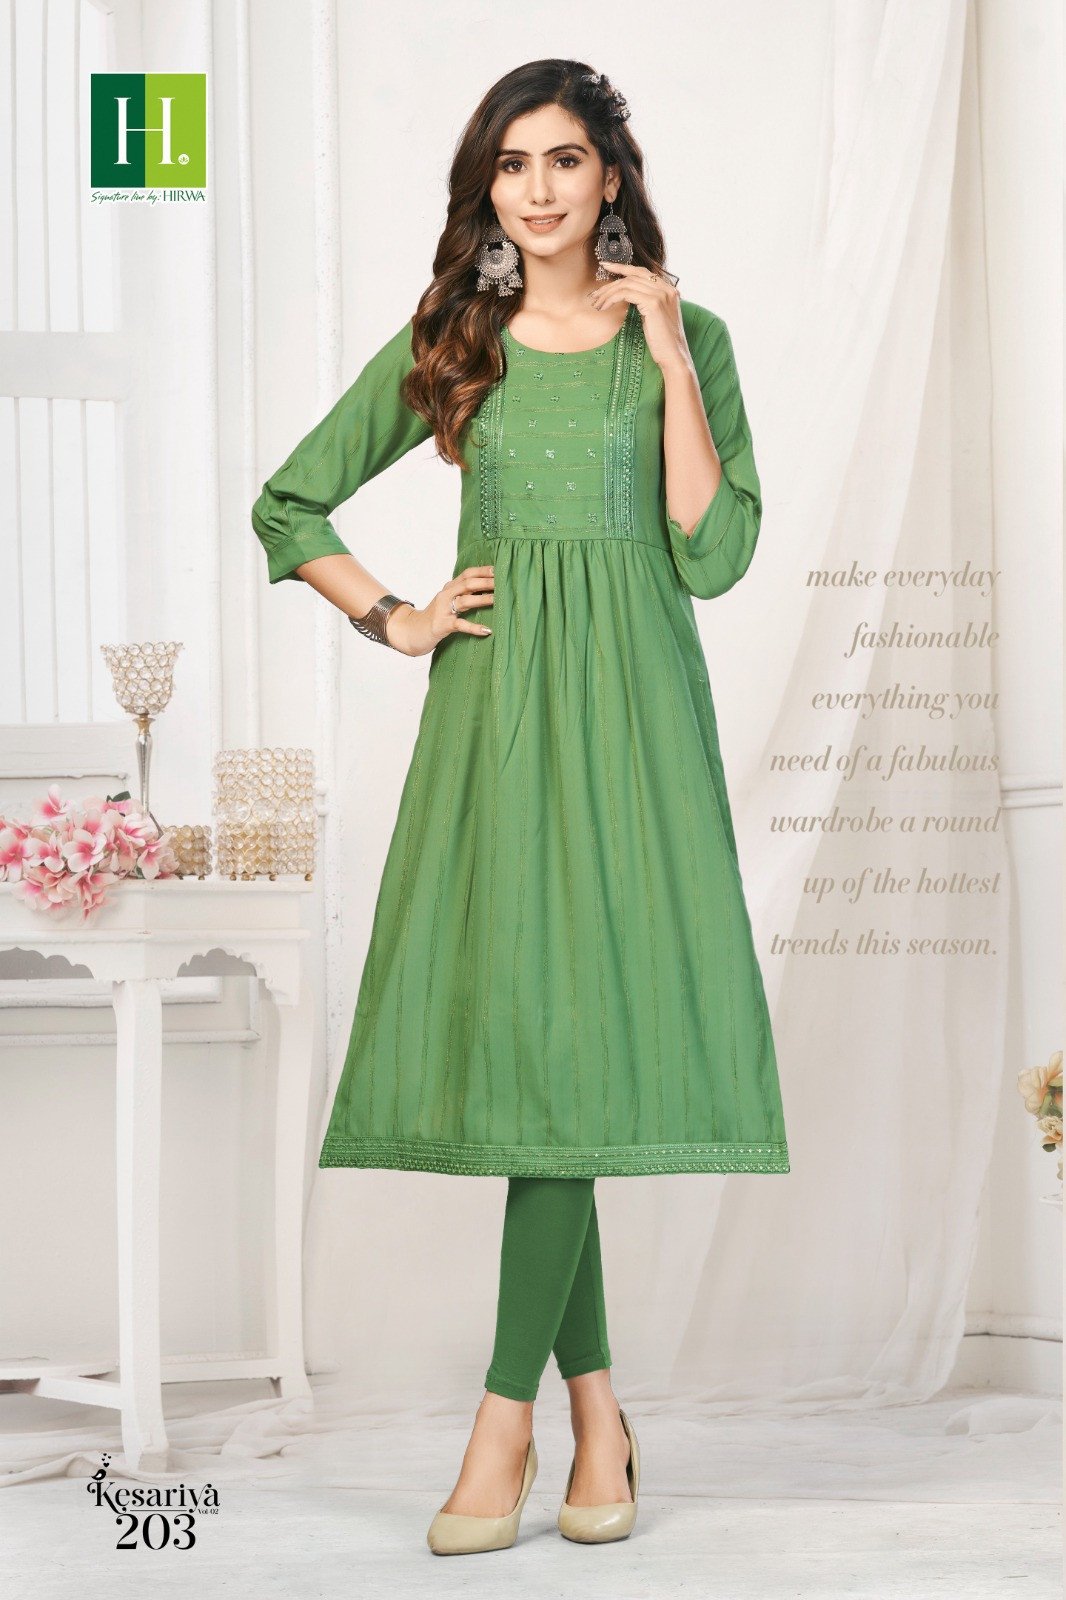 Stepwise Guide On How To Start Selling Kurtis from Home